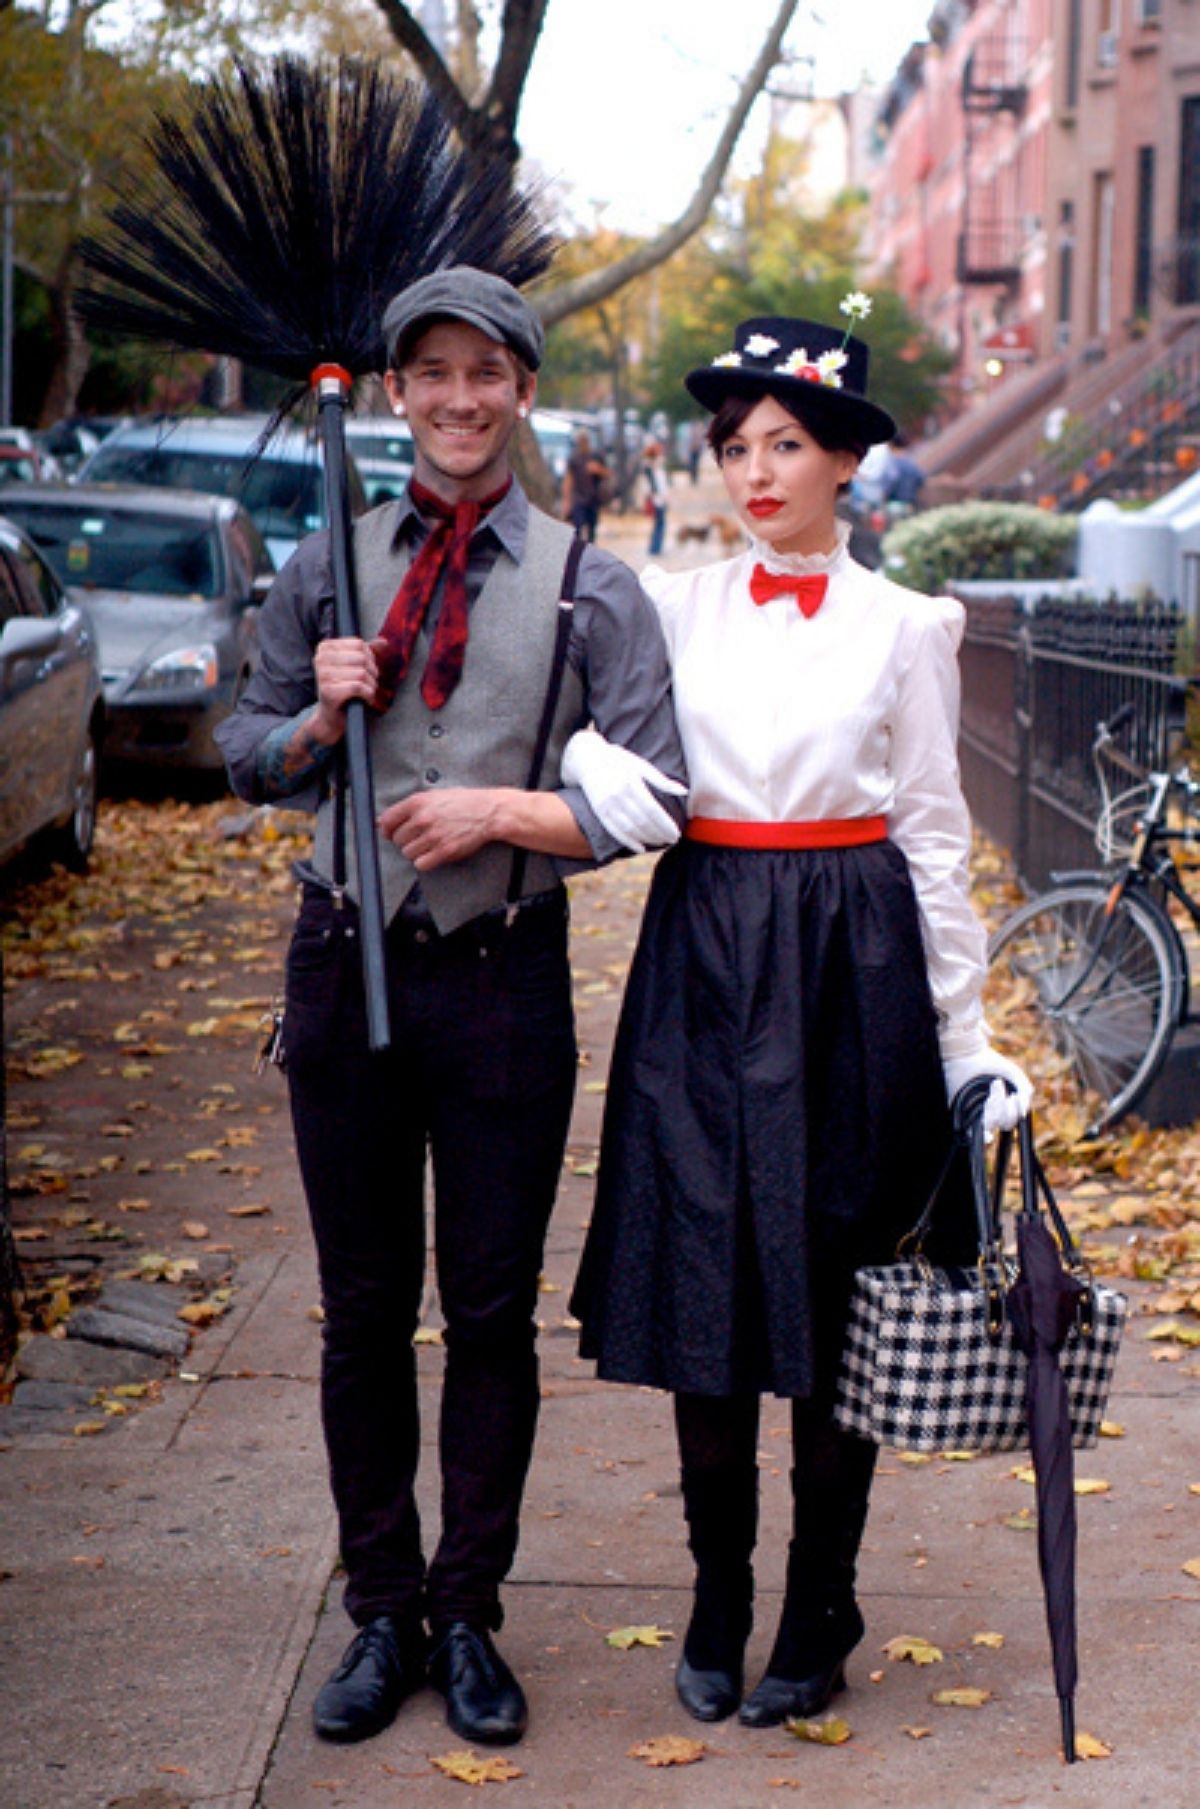 Mary Poppins And Chimney Sweep costumes